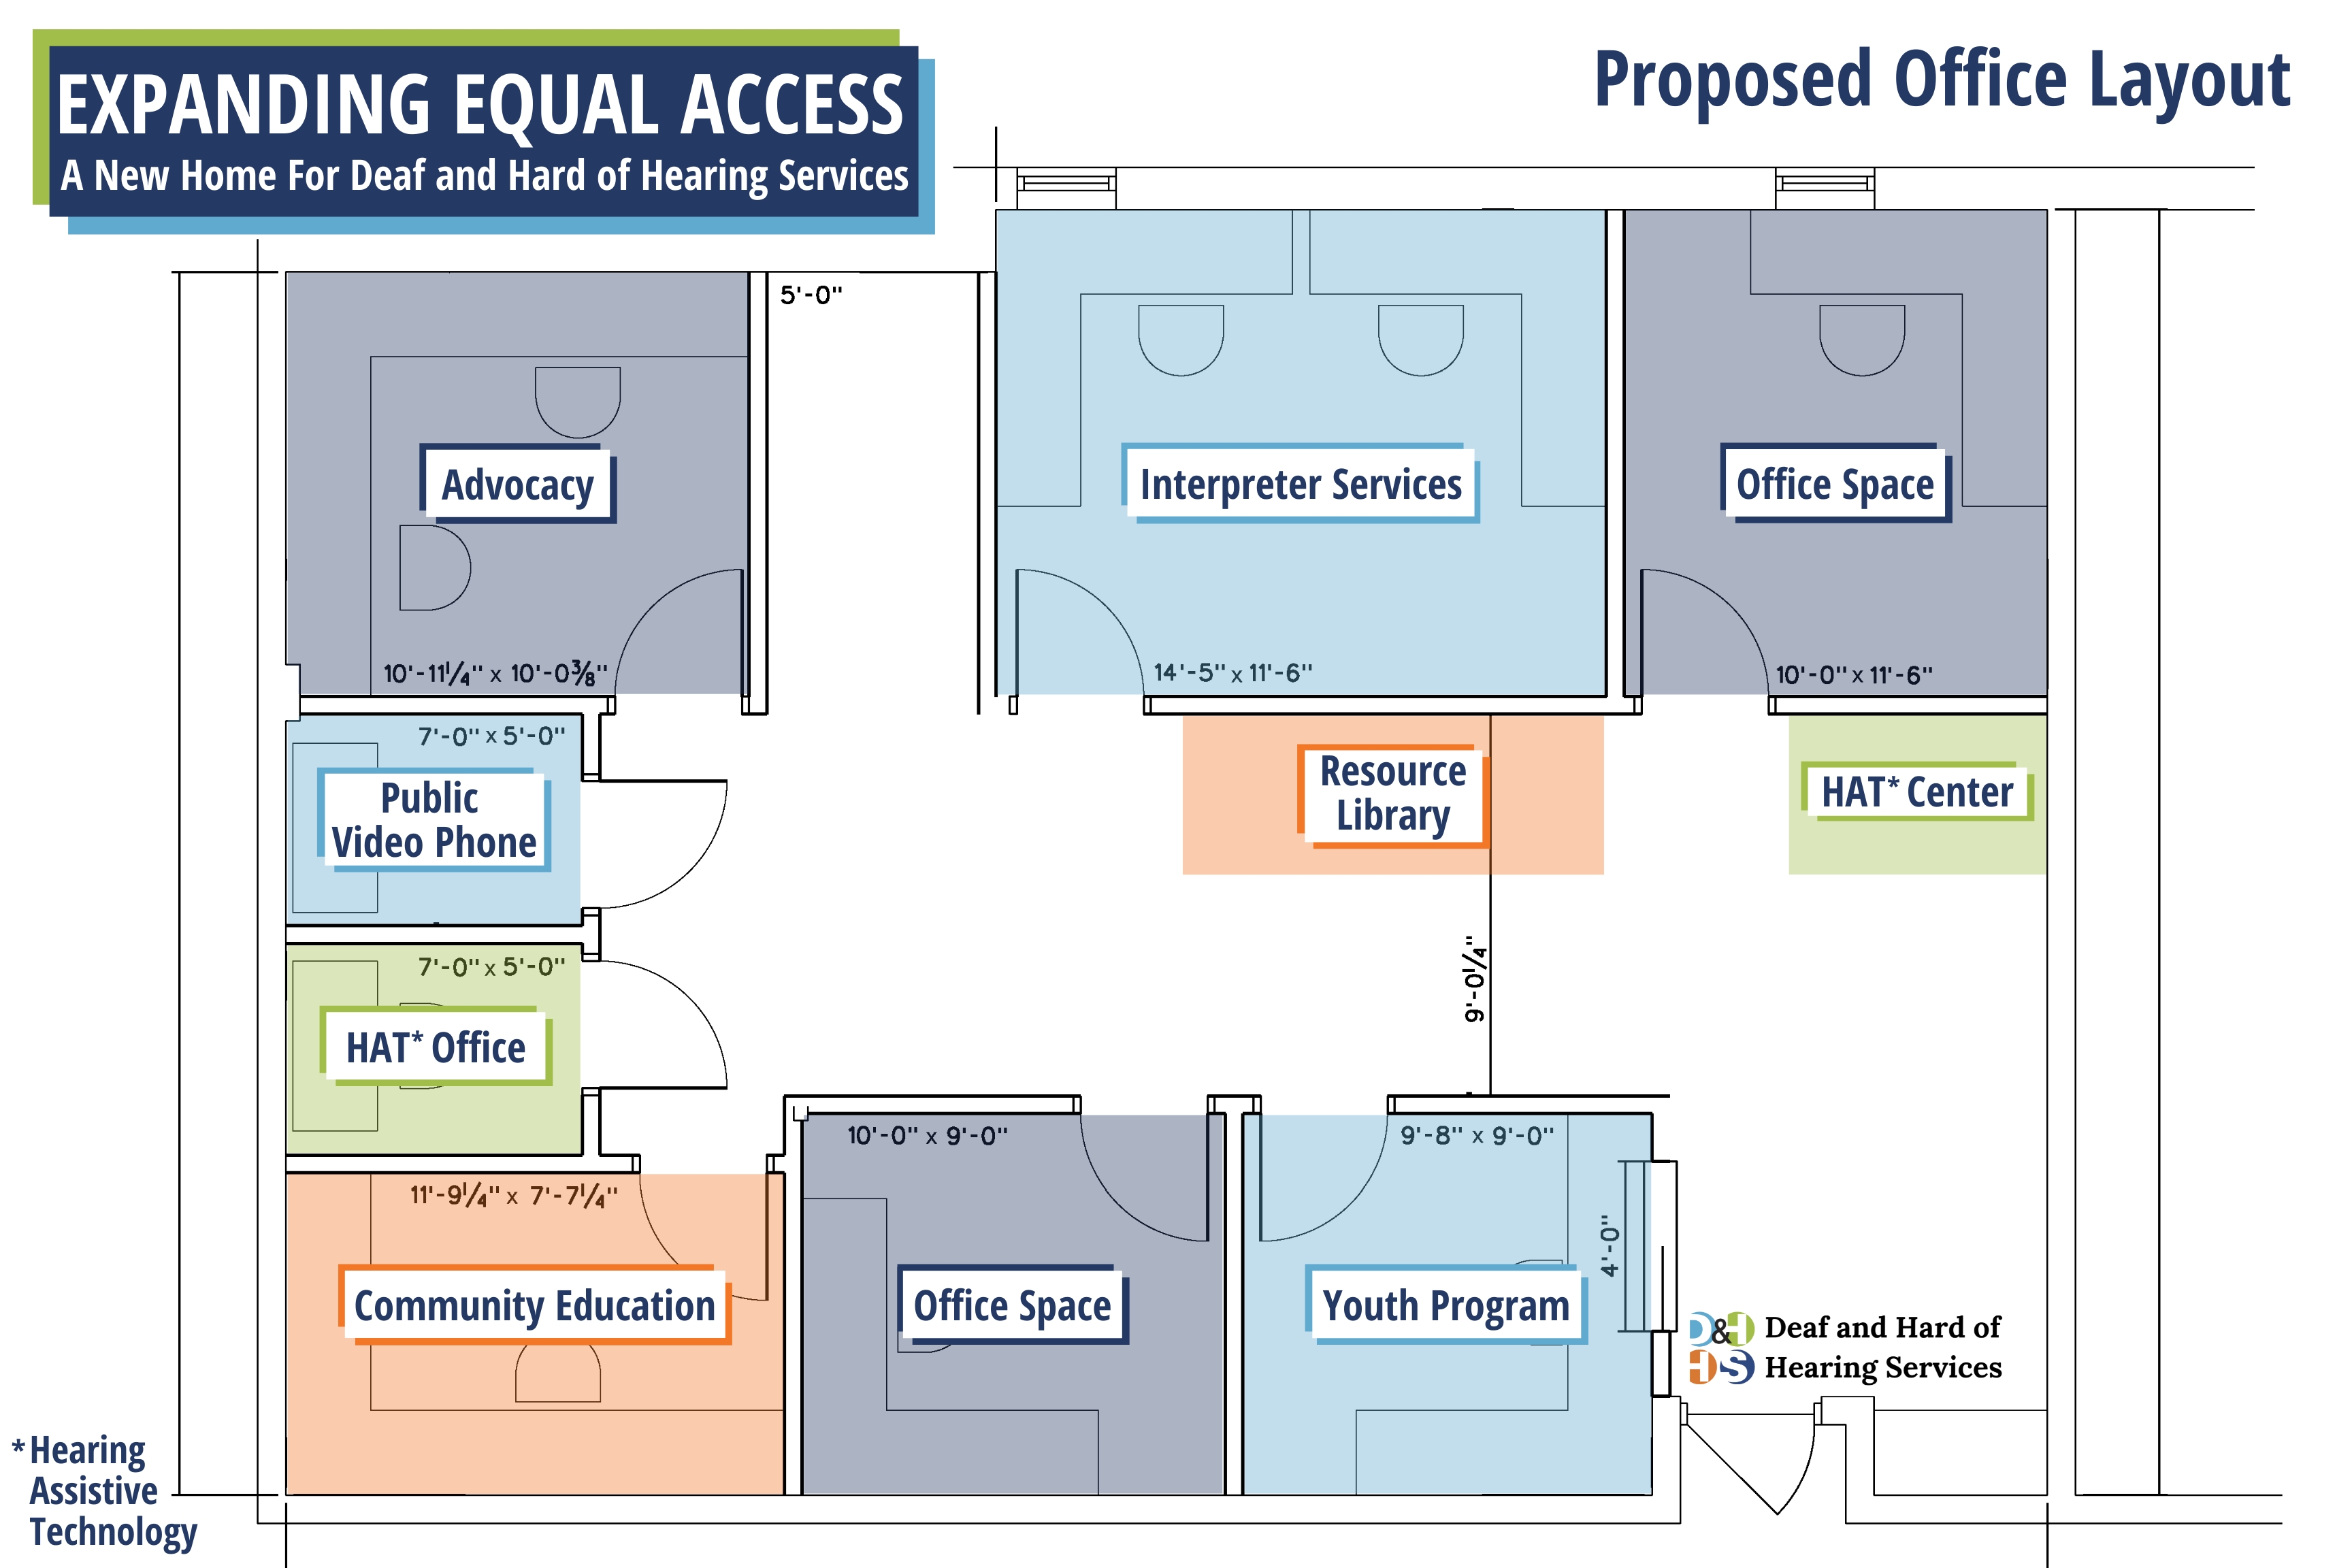 Image of proposed office layout